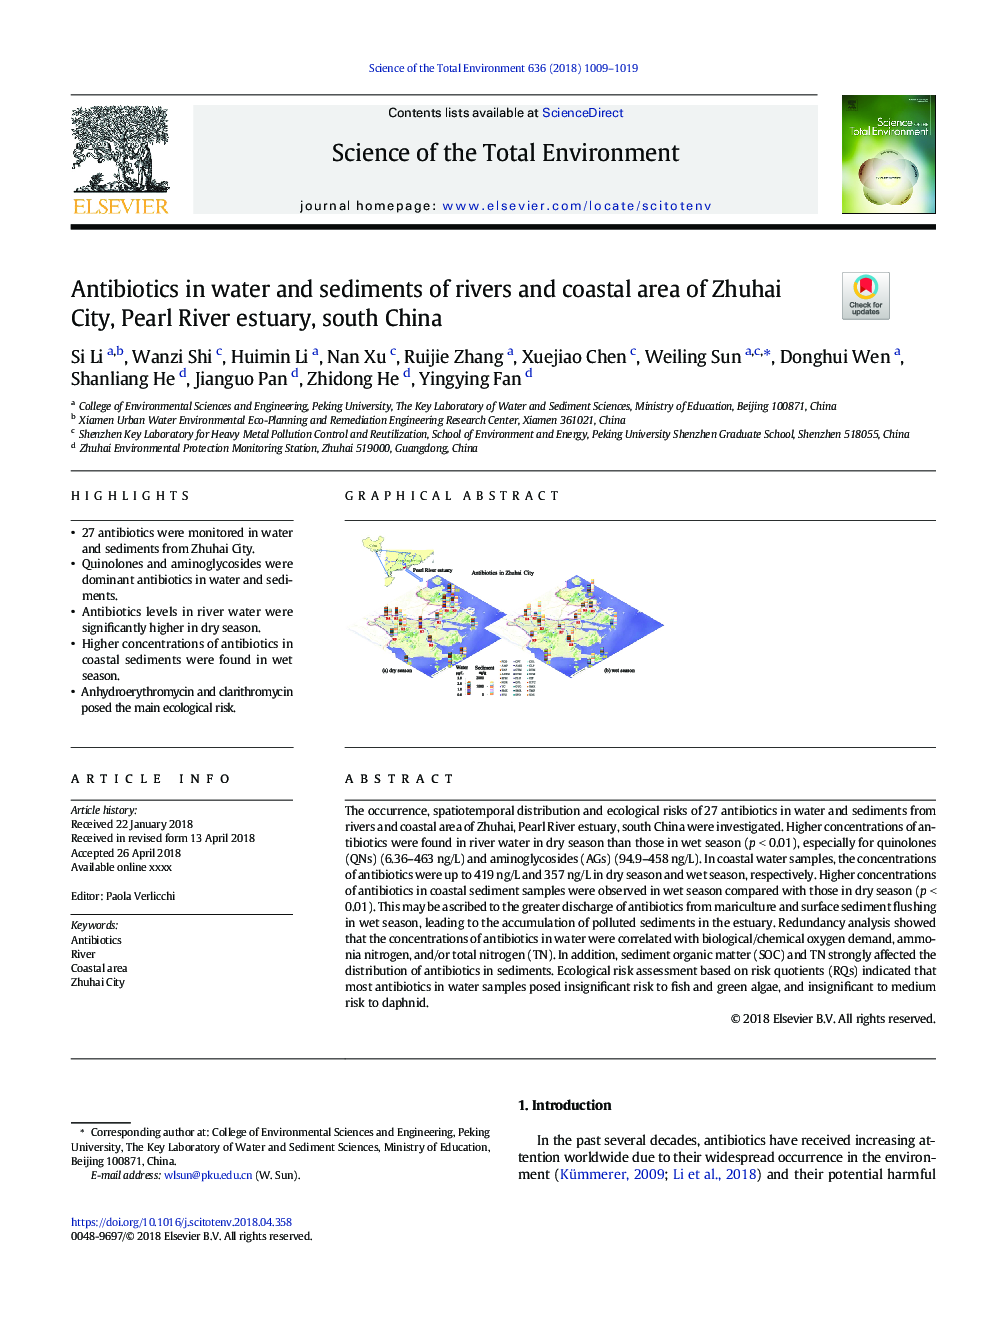 Antibiotics in water and sediments of rivers and coastal area of Zhuhai City, Pearl River estuary, south China